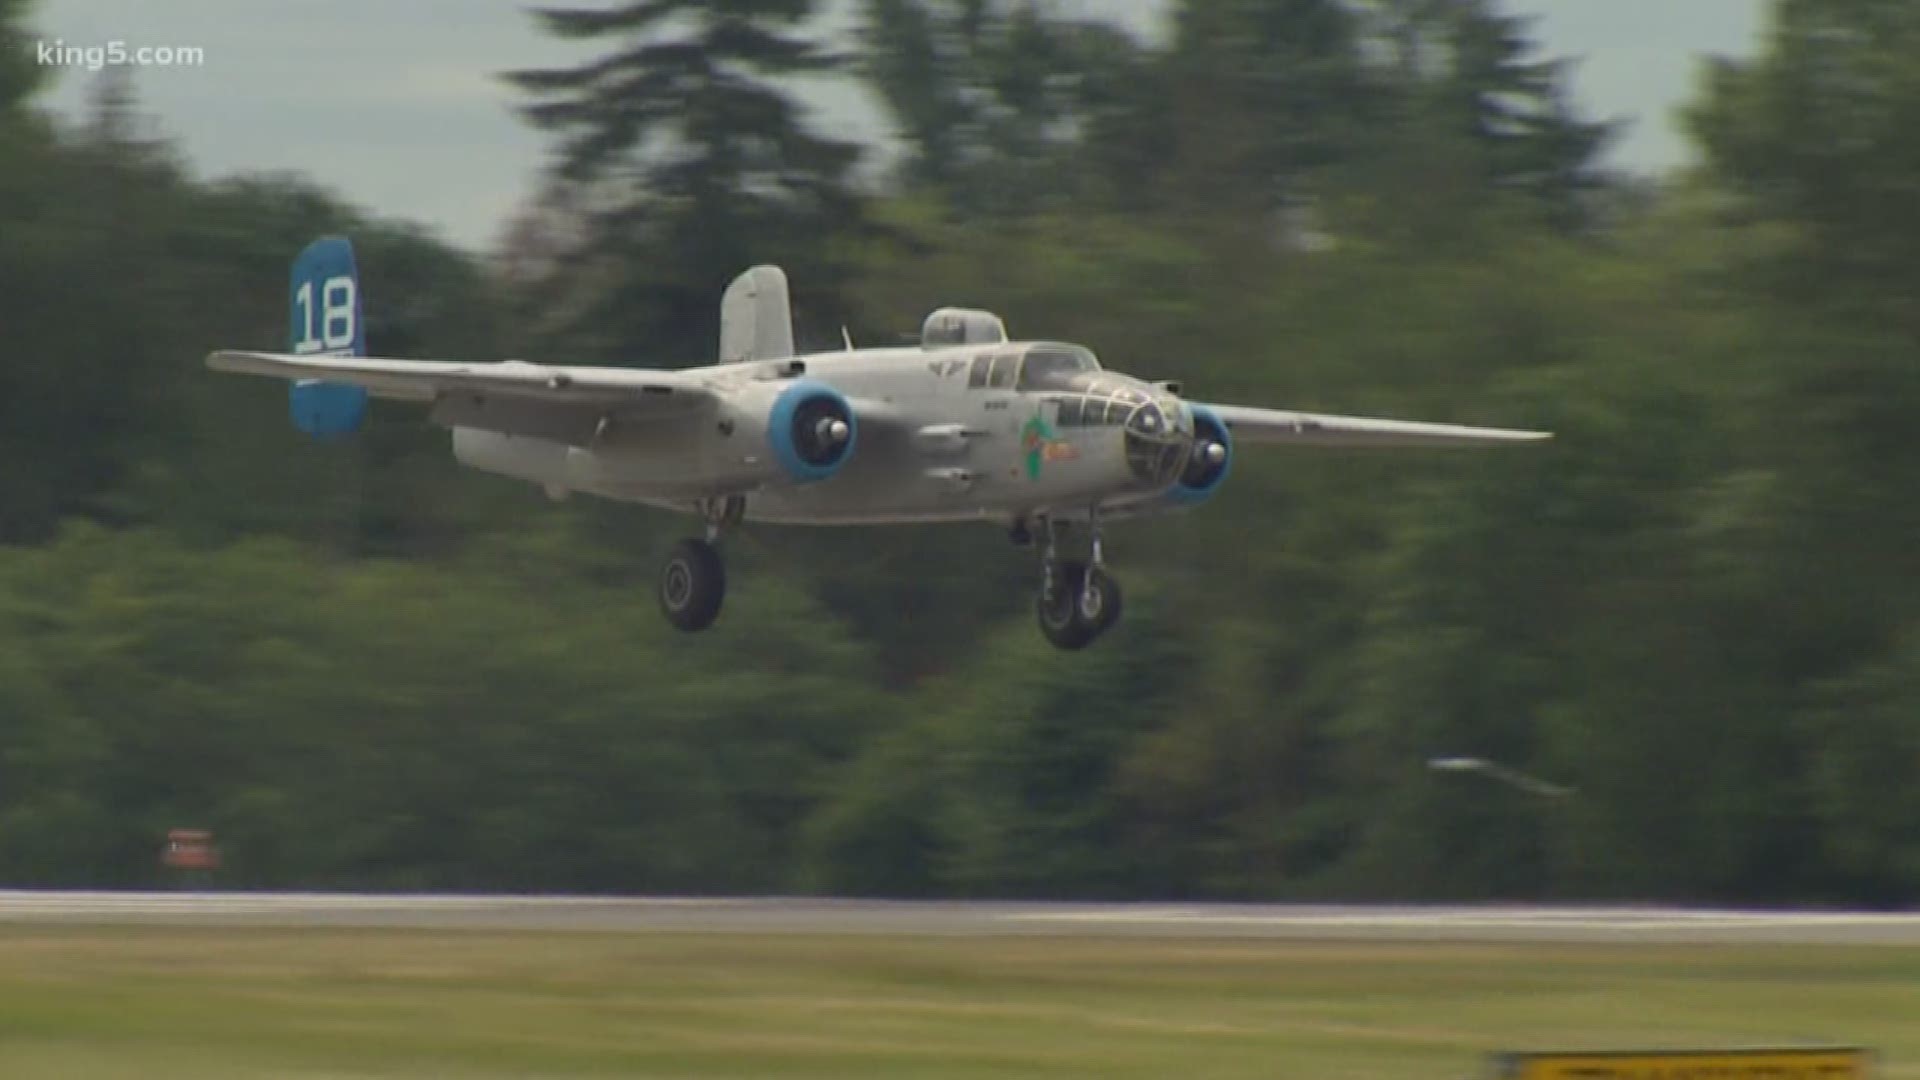 A pair of World War II bombers are available to tour in Skagit County this week. The bombers are among the few still able to fly. KING 5's Eric Wilkinson reports.